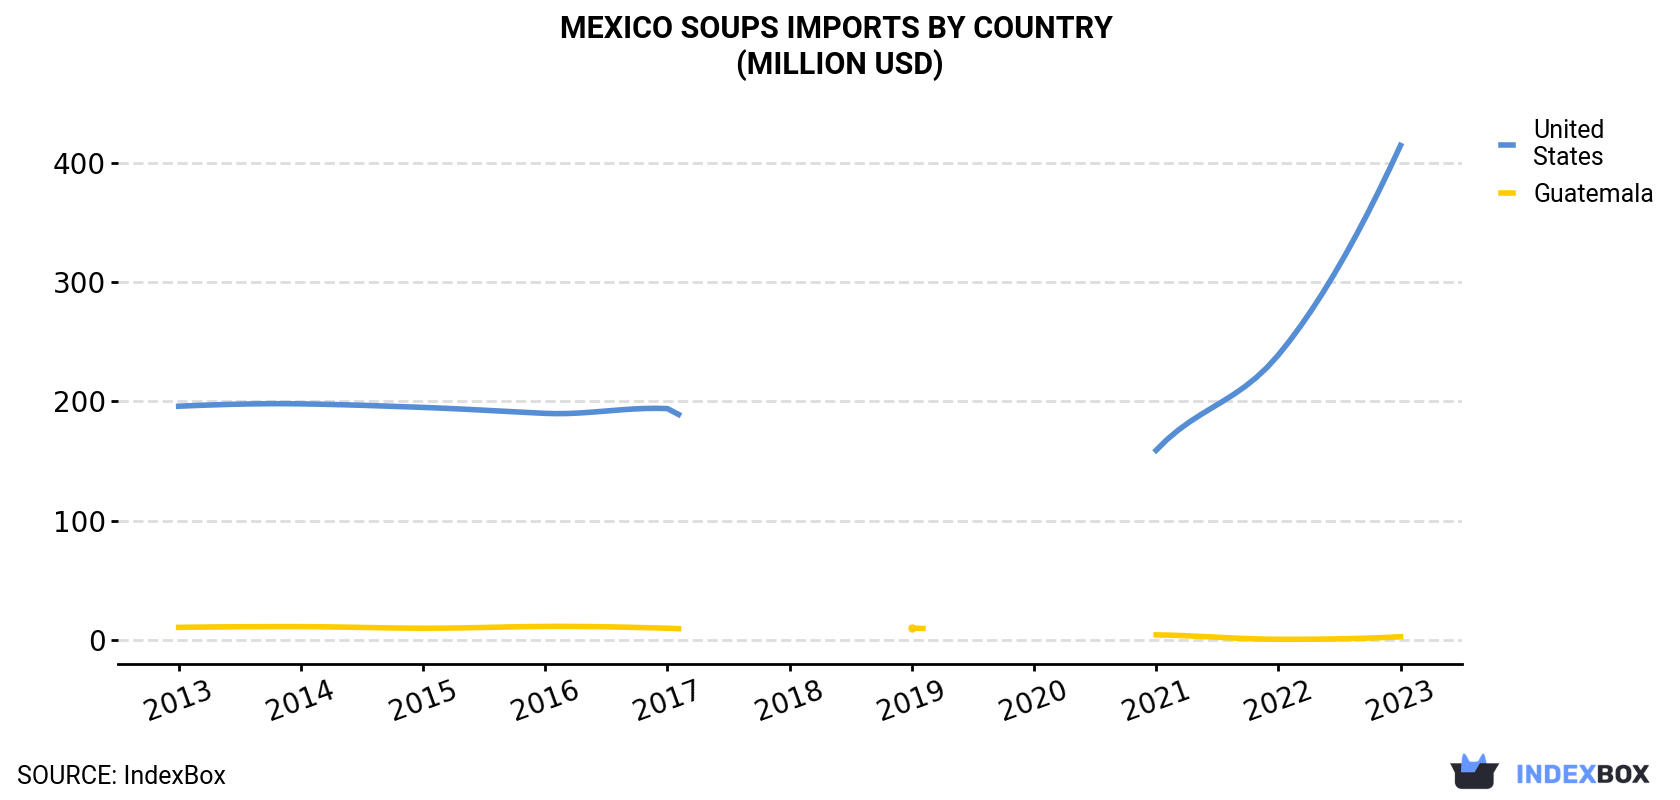 Mexico Soups Imports By Country (Million USD)